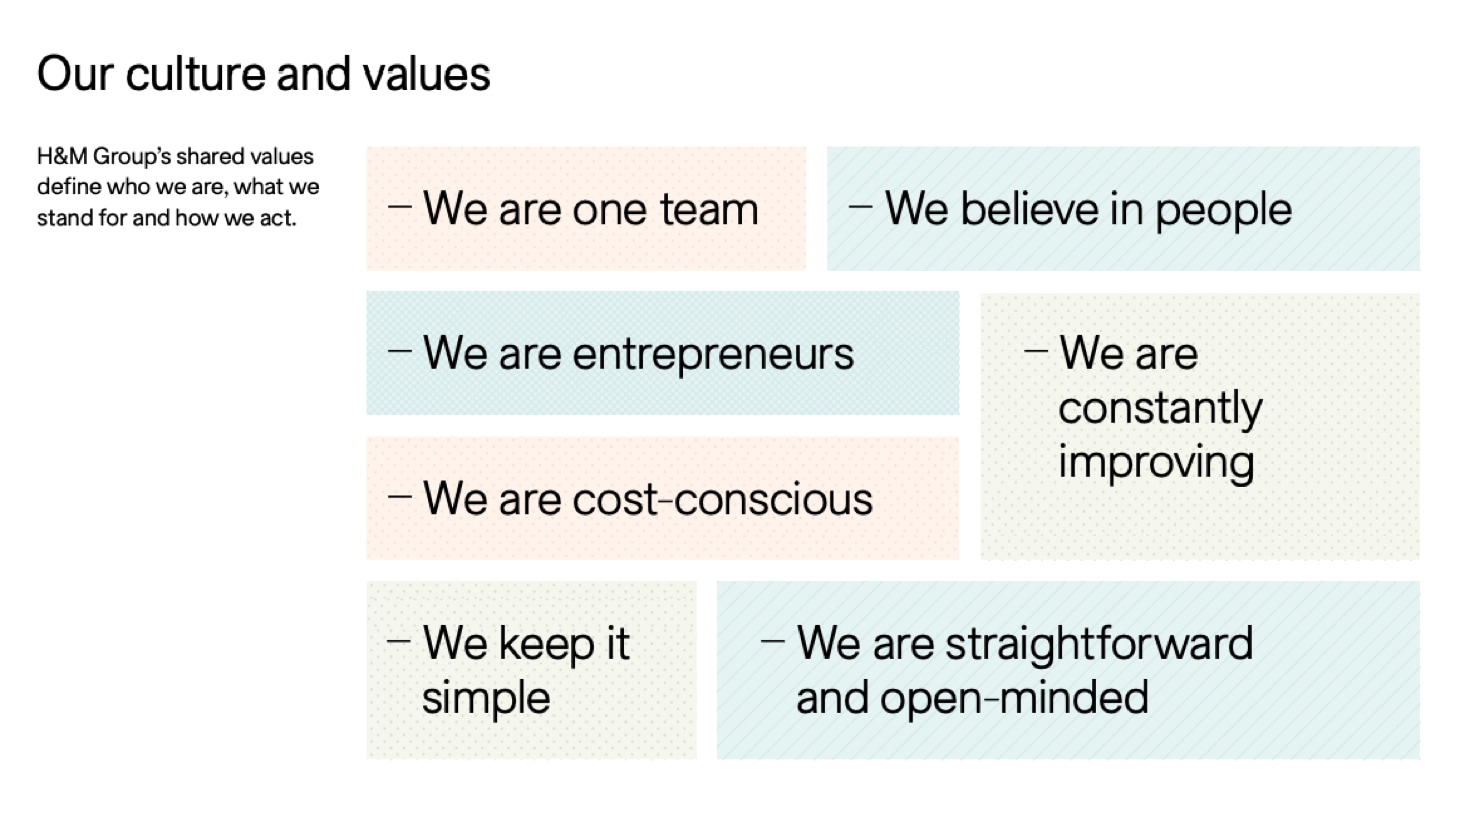 Our culture and values chart.